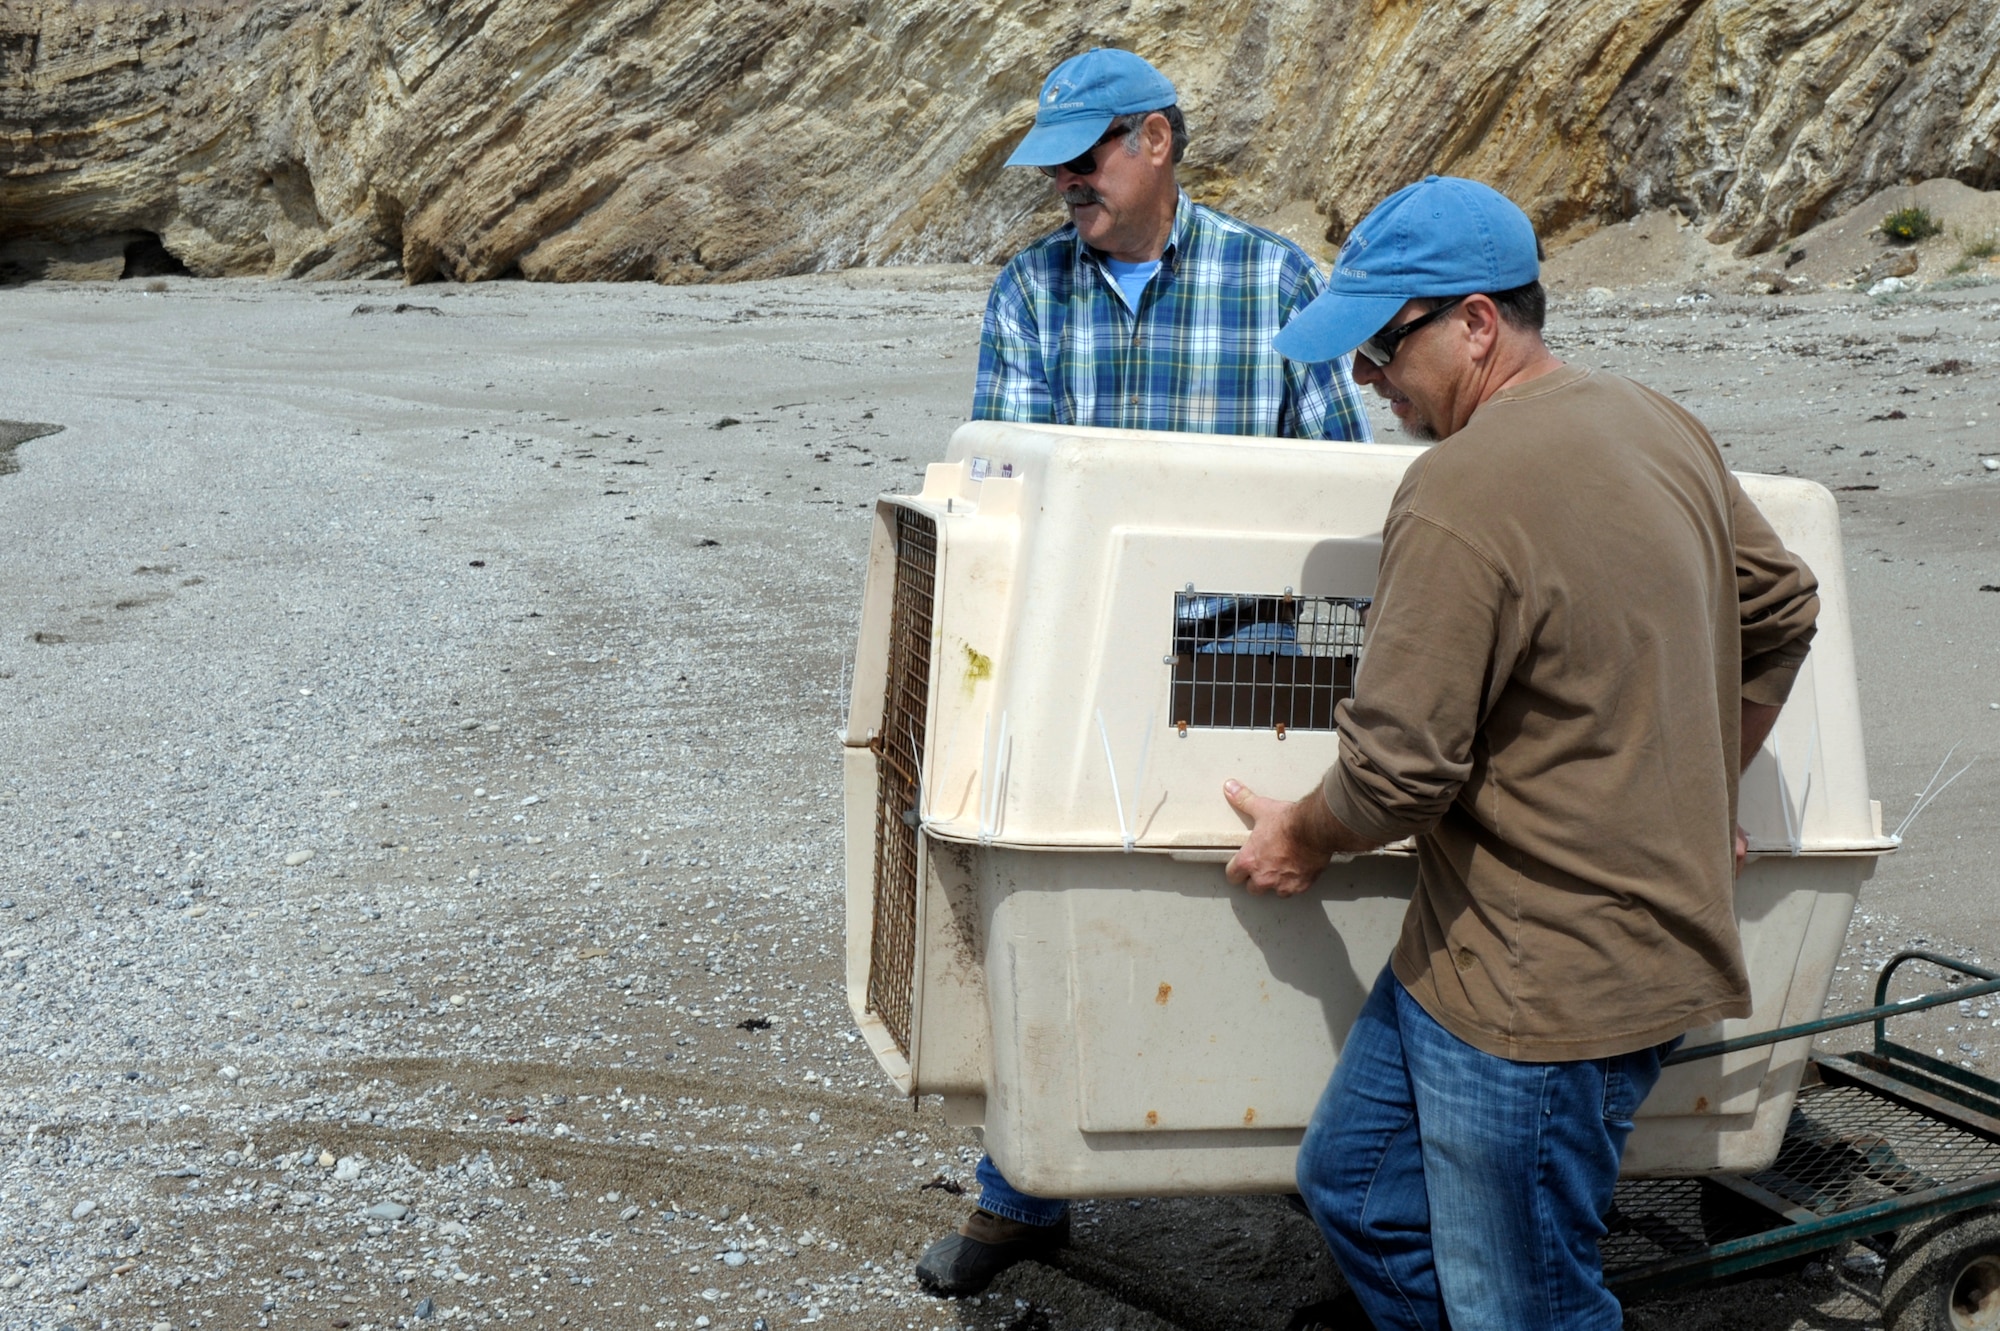 VANDENBERG AIR FORCE BASE, Calif. -- Peter Howorth and Paul Stark of the Santa Barbara Marine Mammal Center carry a rescued Northern Californian Elephant Seal to the water’s edge at a remote beach here, Tuesday, April 24, 2012. The Santa Barbara Marine Mammal Center rescues, rehabilitates and releases  trapped and endangered marine mammals along the California’s Central Coast.  (U.S. Air Force photo/Jerry E. Clemens Jr.)